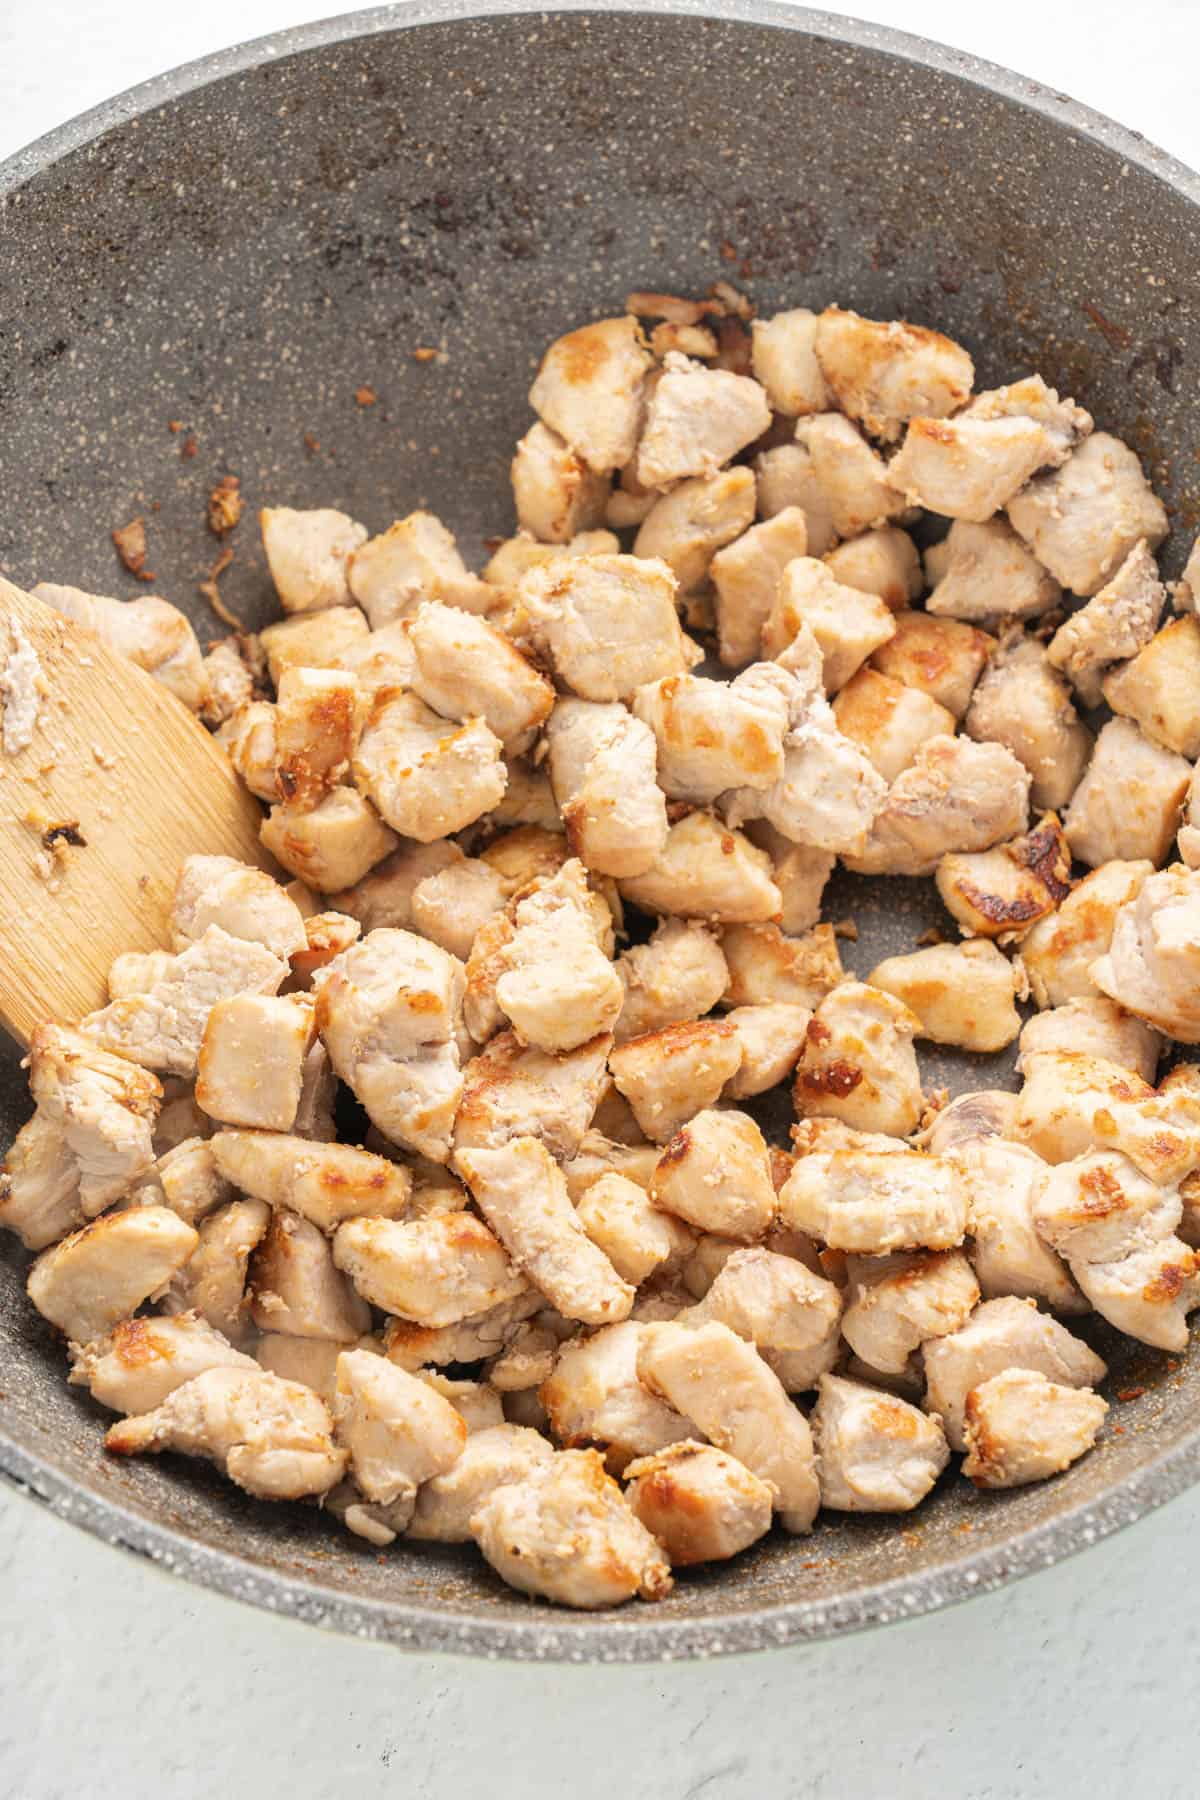 Cooked bite-size pieces of chicken breast in a pan.